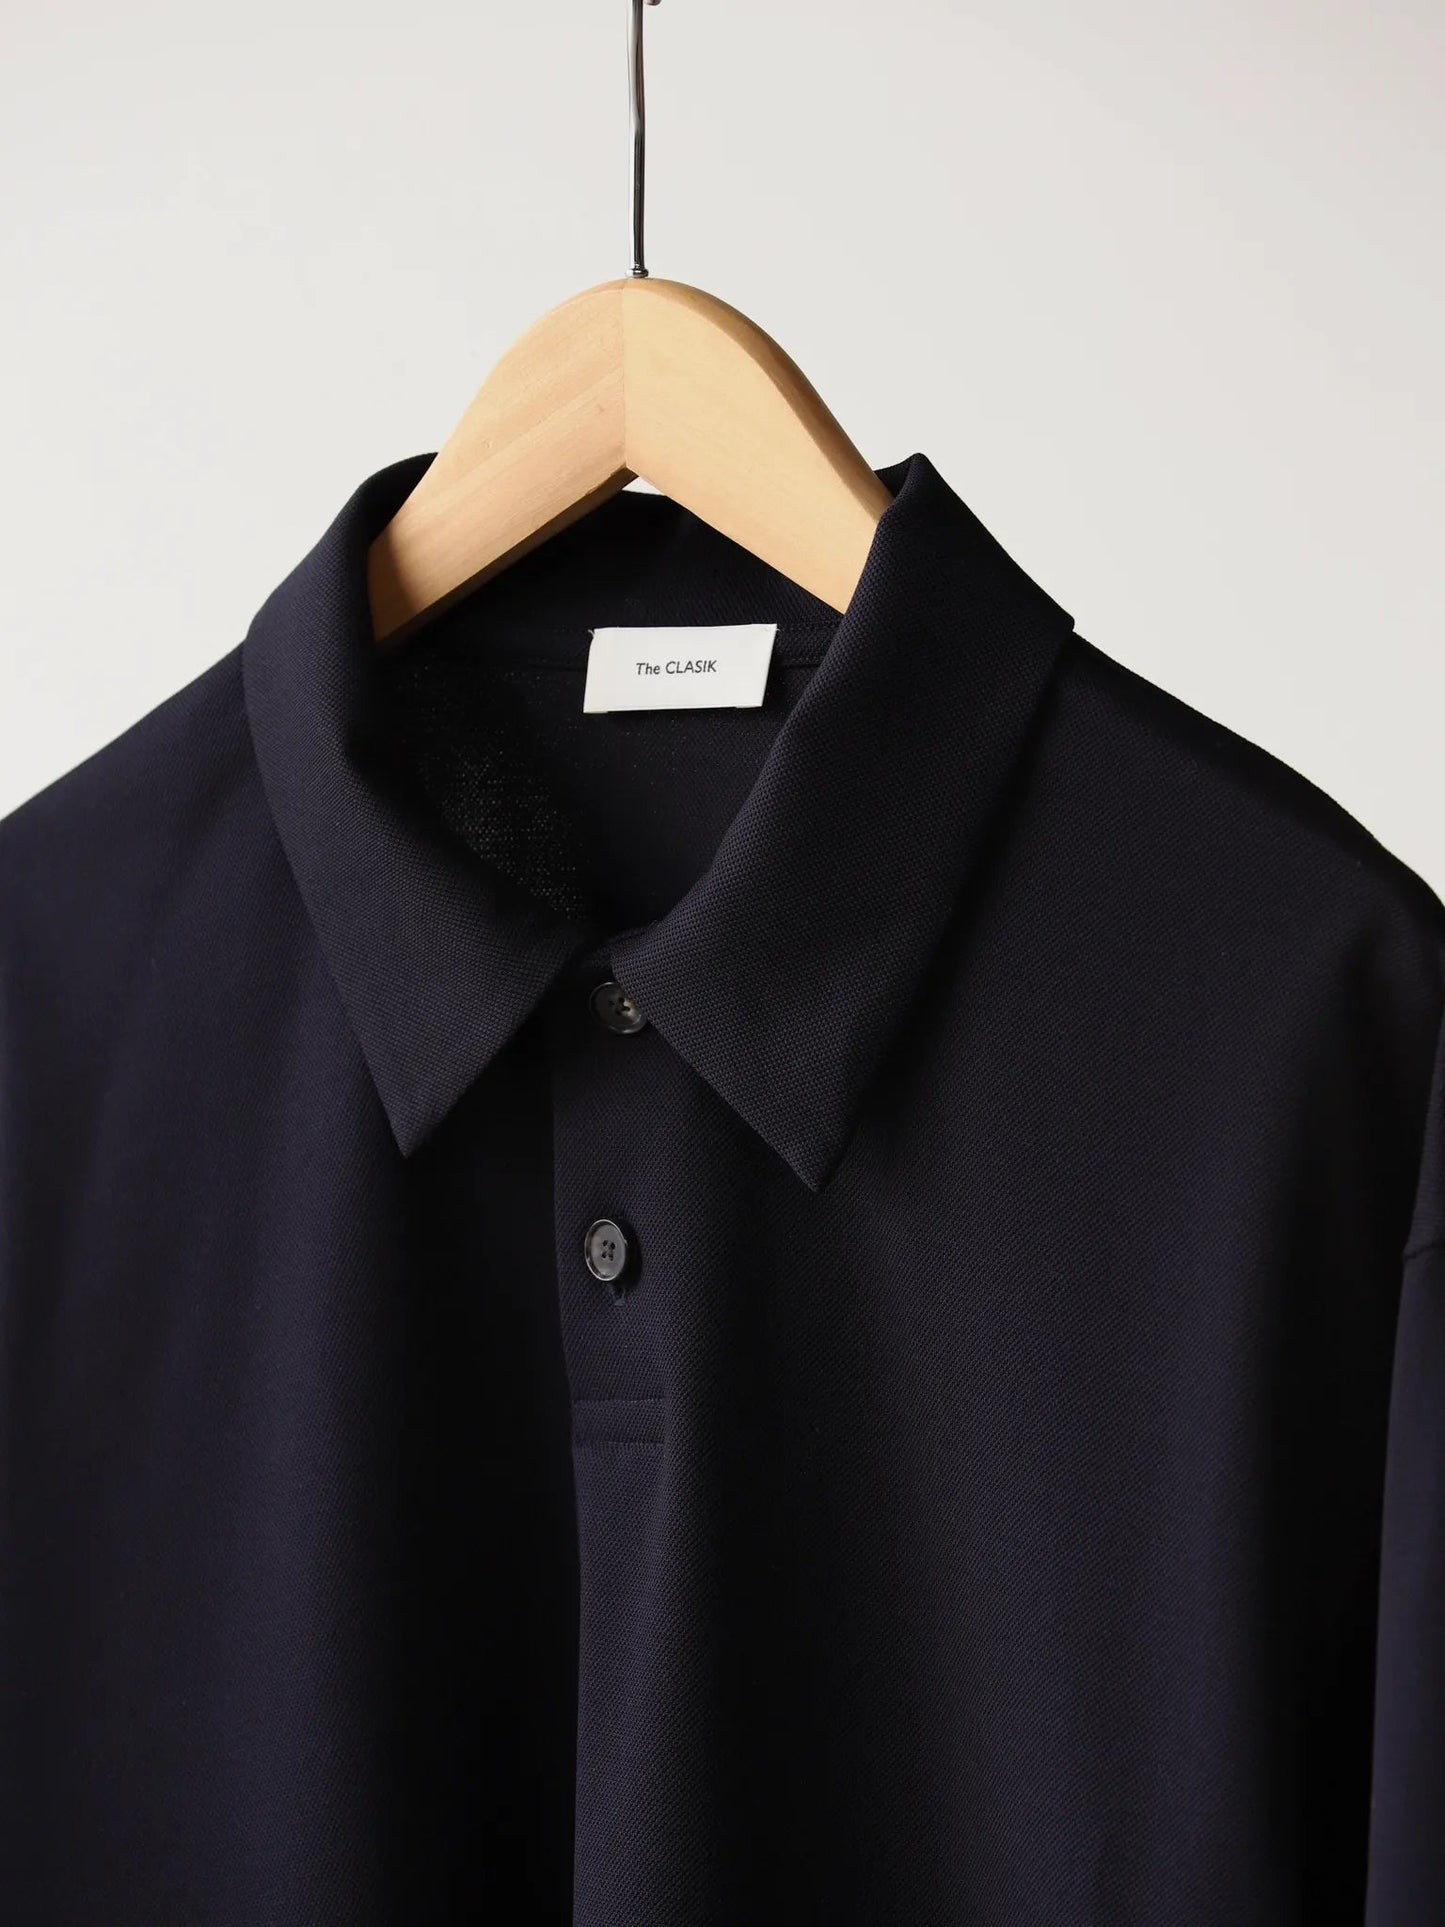 the-classic-polo-shirts-navy-4